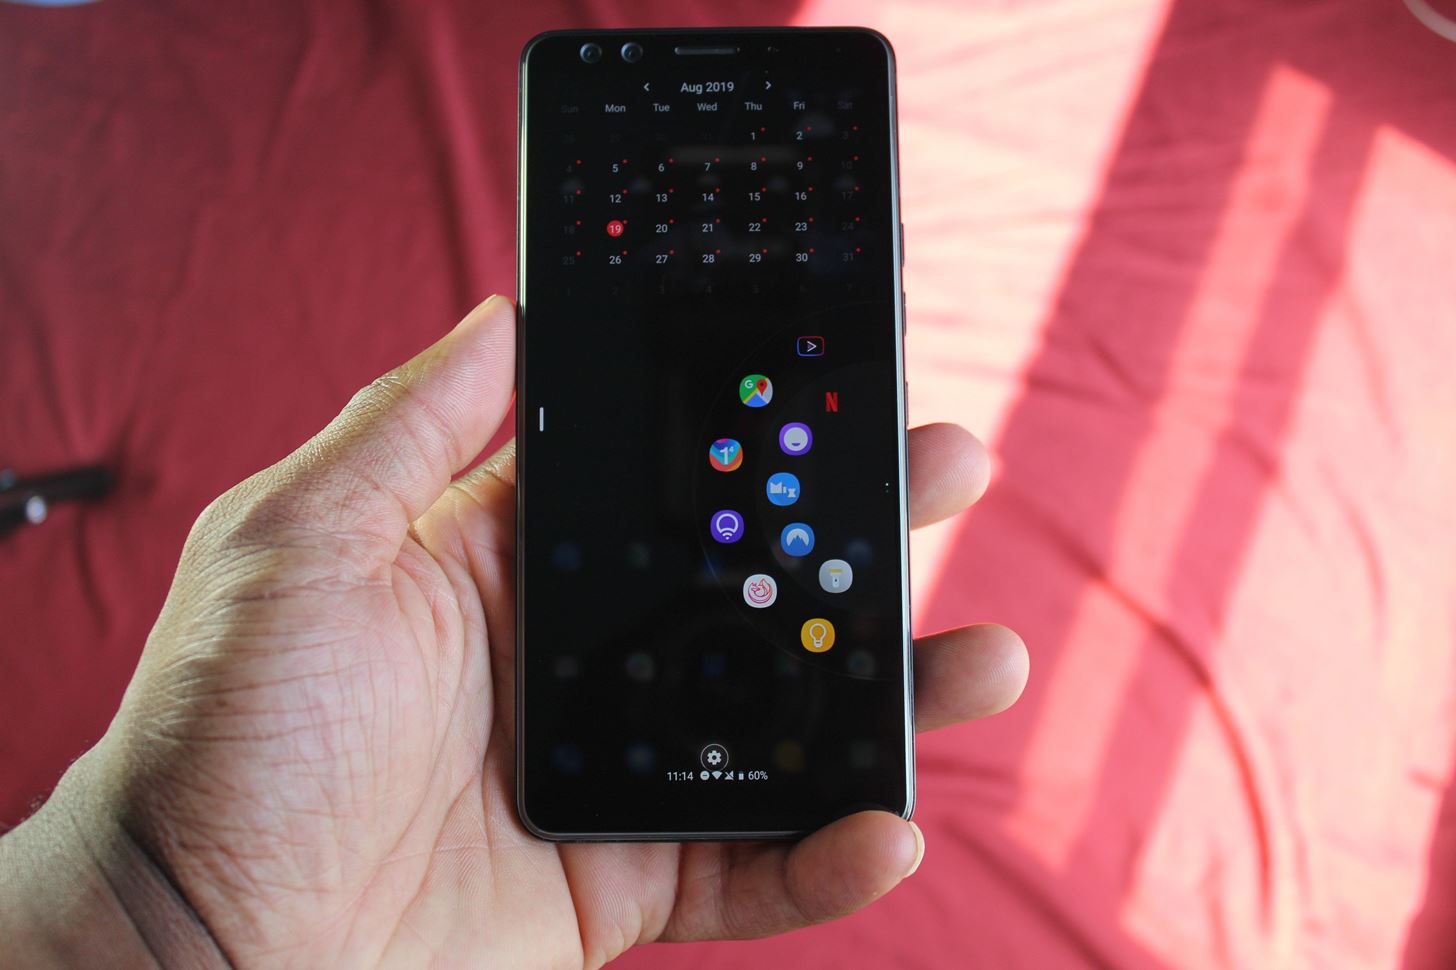 The 5 Best Phones for Staying Productive & Getting Things Done in 2019